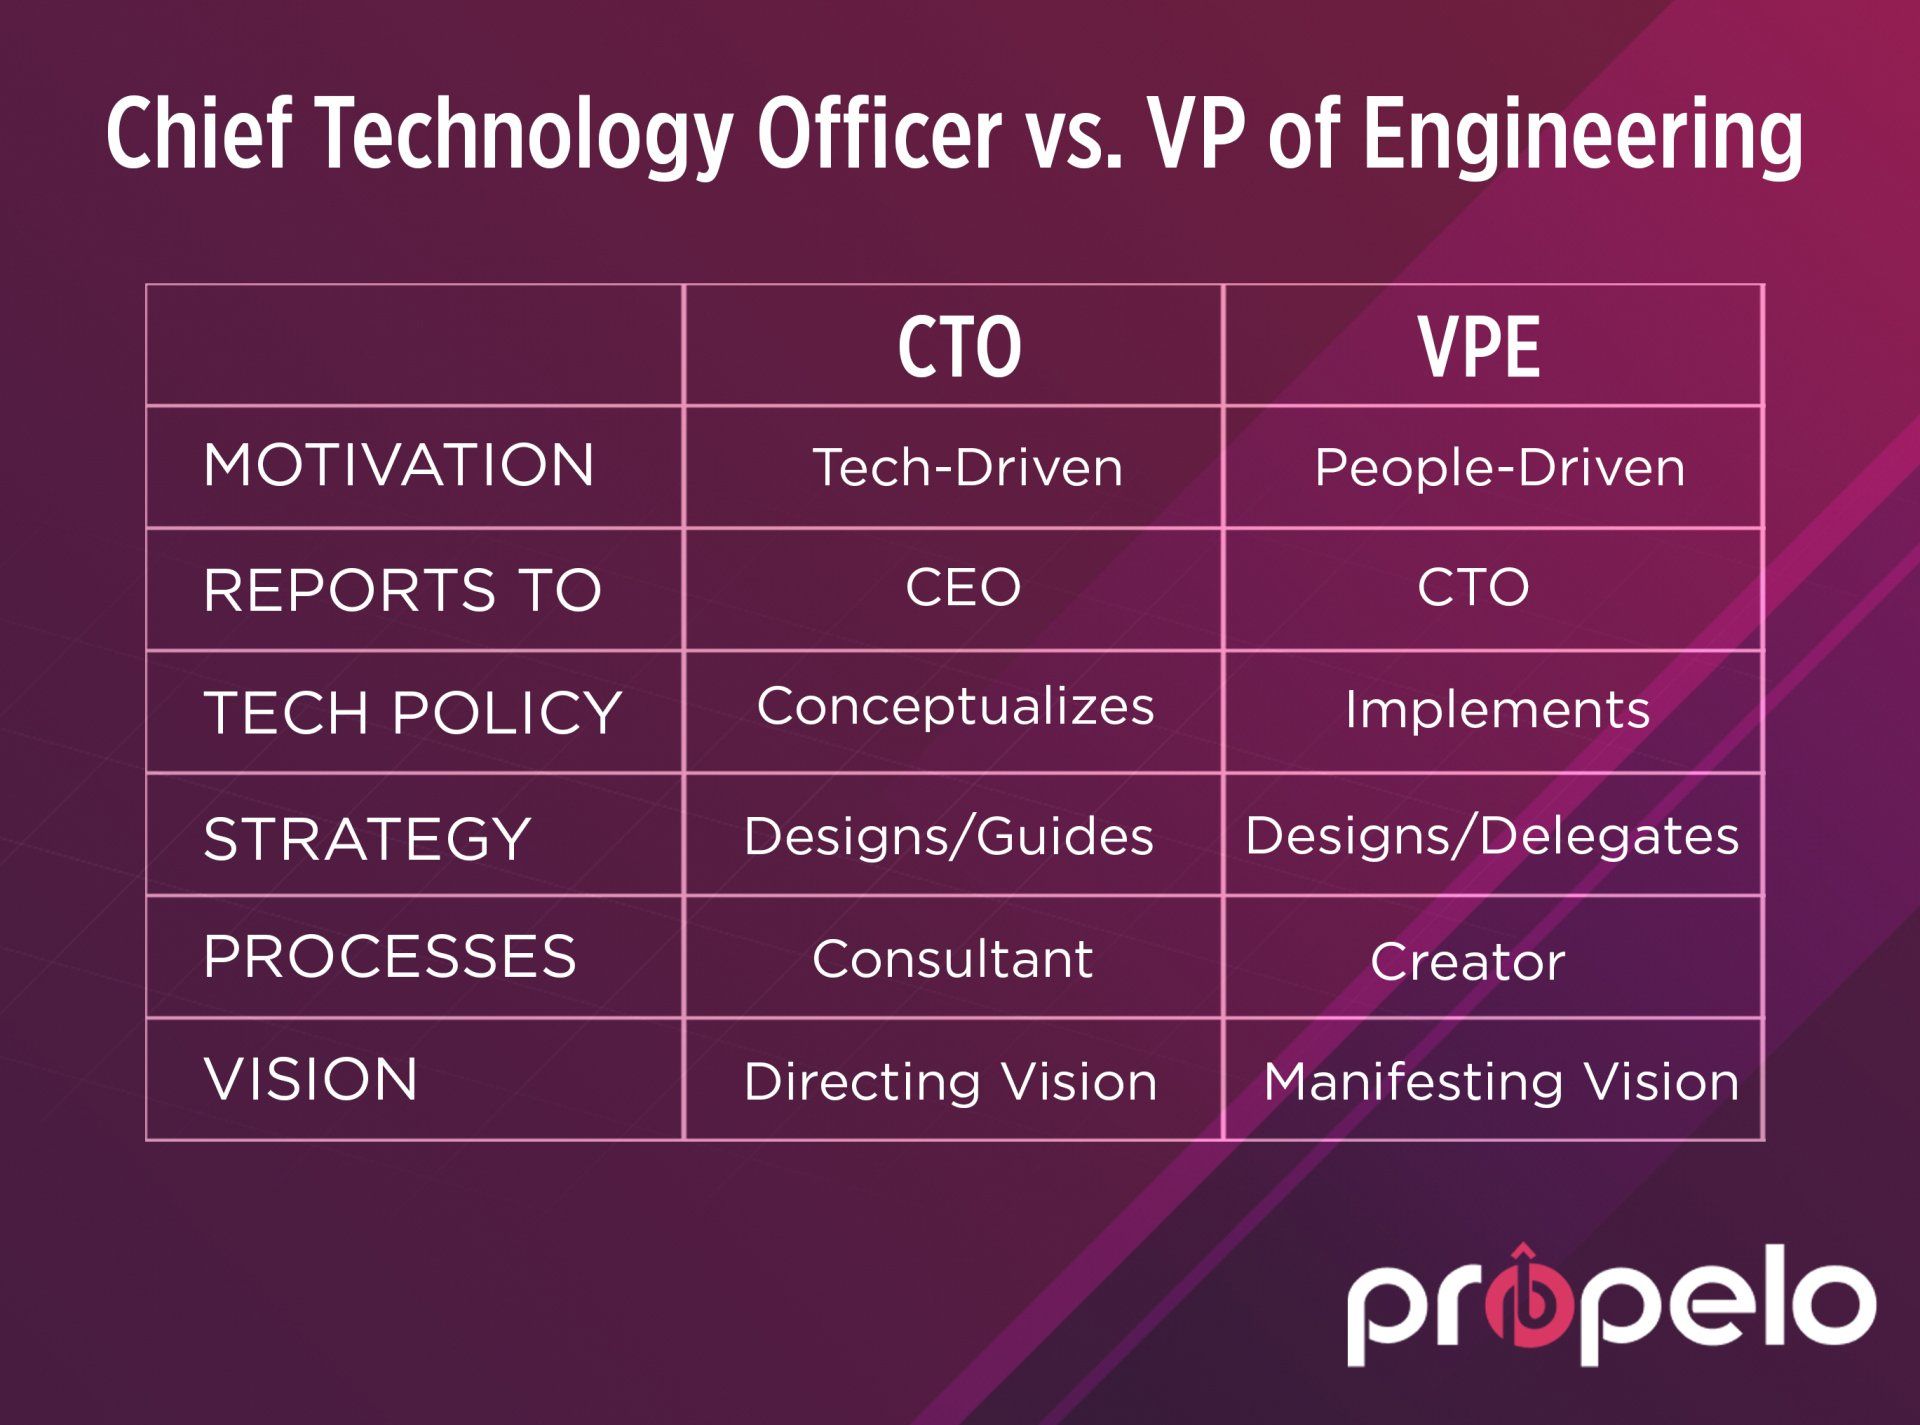 cto vs vpe propelo vp engineering traits 2022 1920w Previously Published to Propelo.AI on What it means to be VP of Engineering